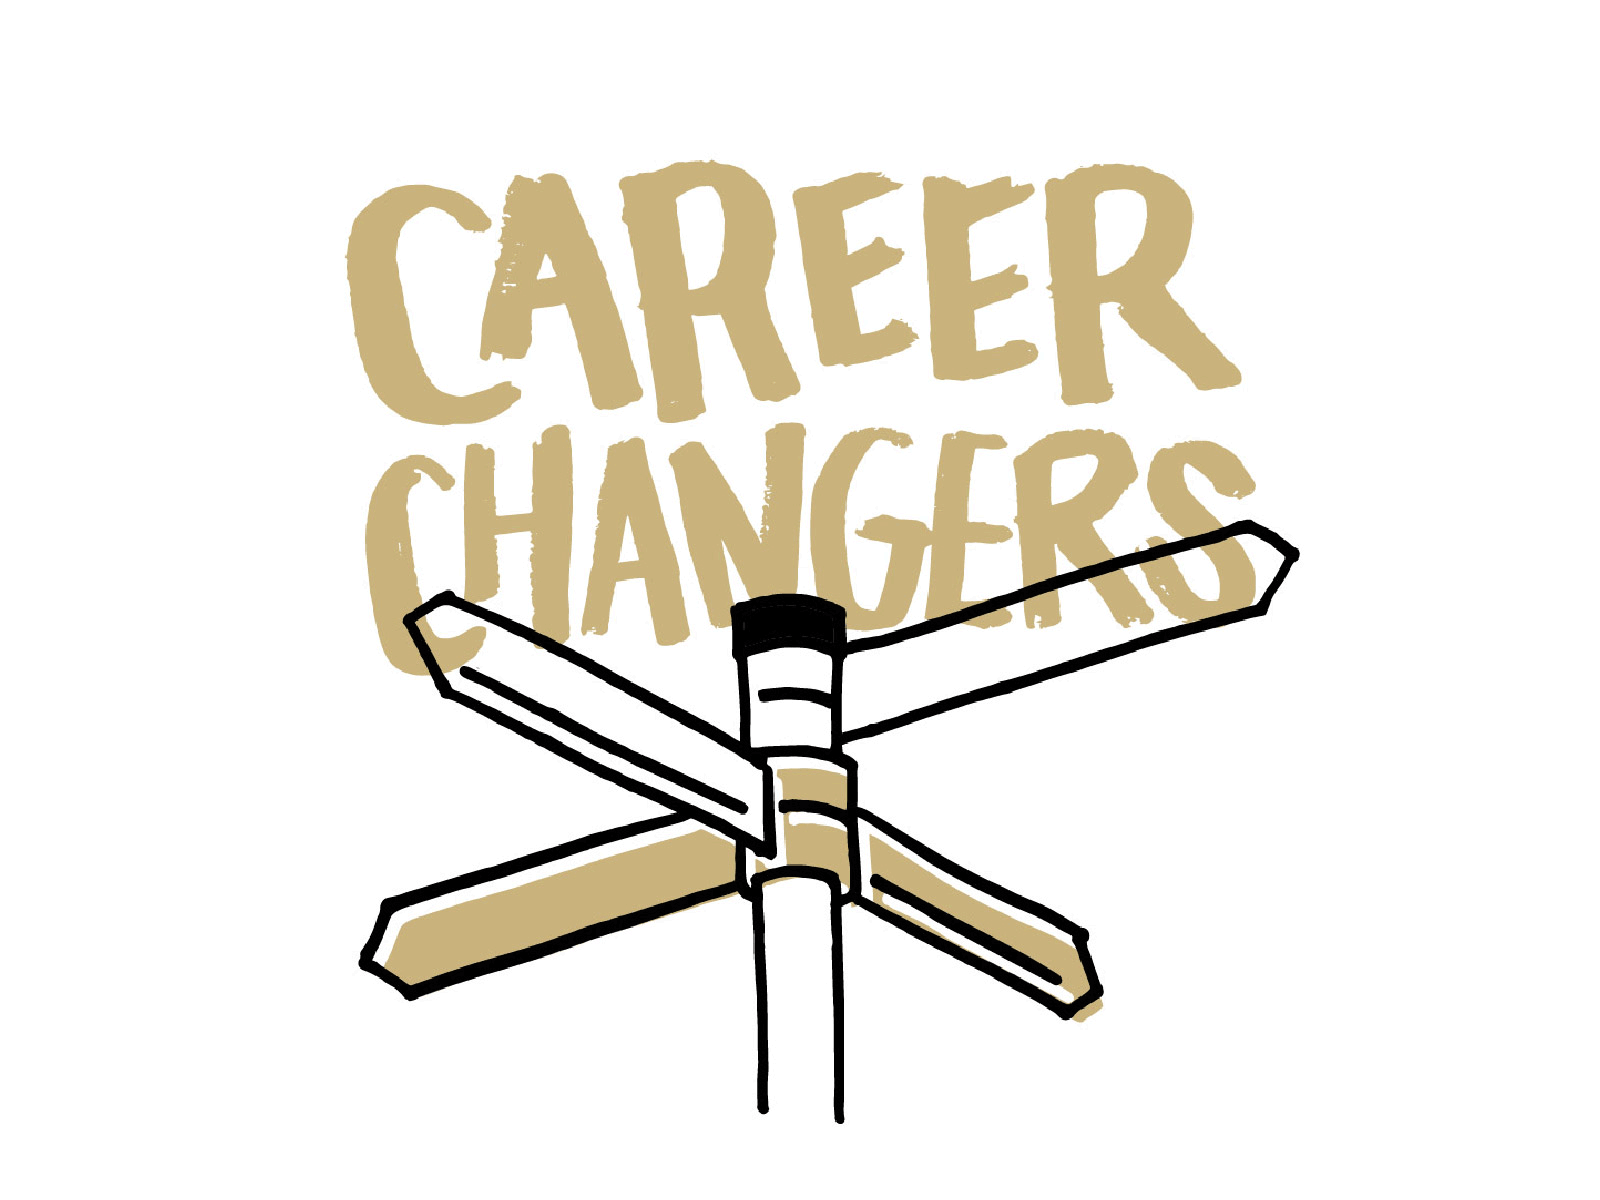 Career Changers clean design hand lettering illustration typography